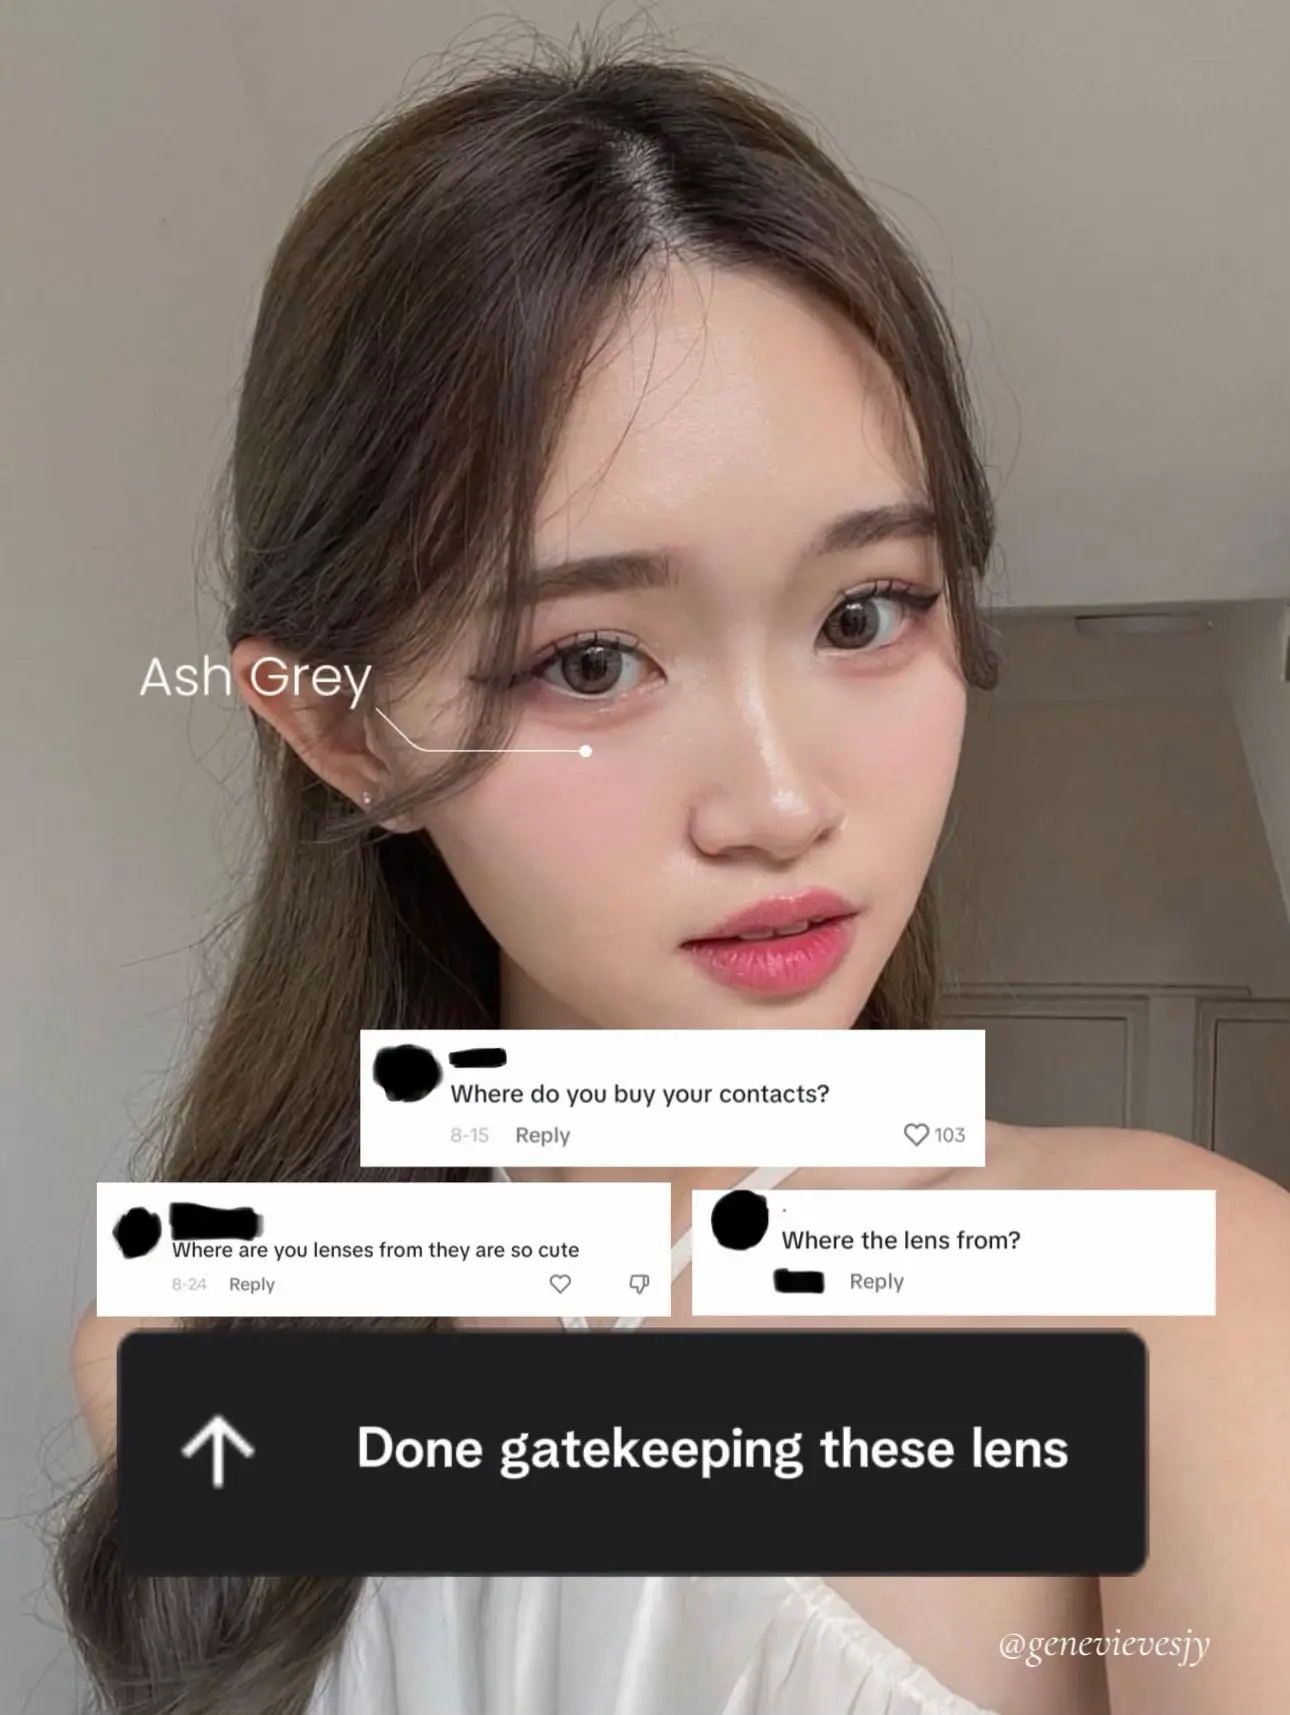 DONE GATEKEEPING THESE LENSES's images